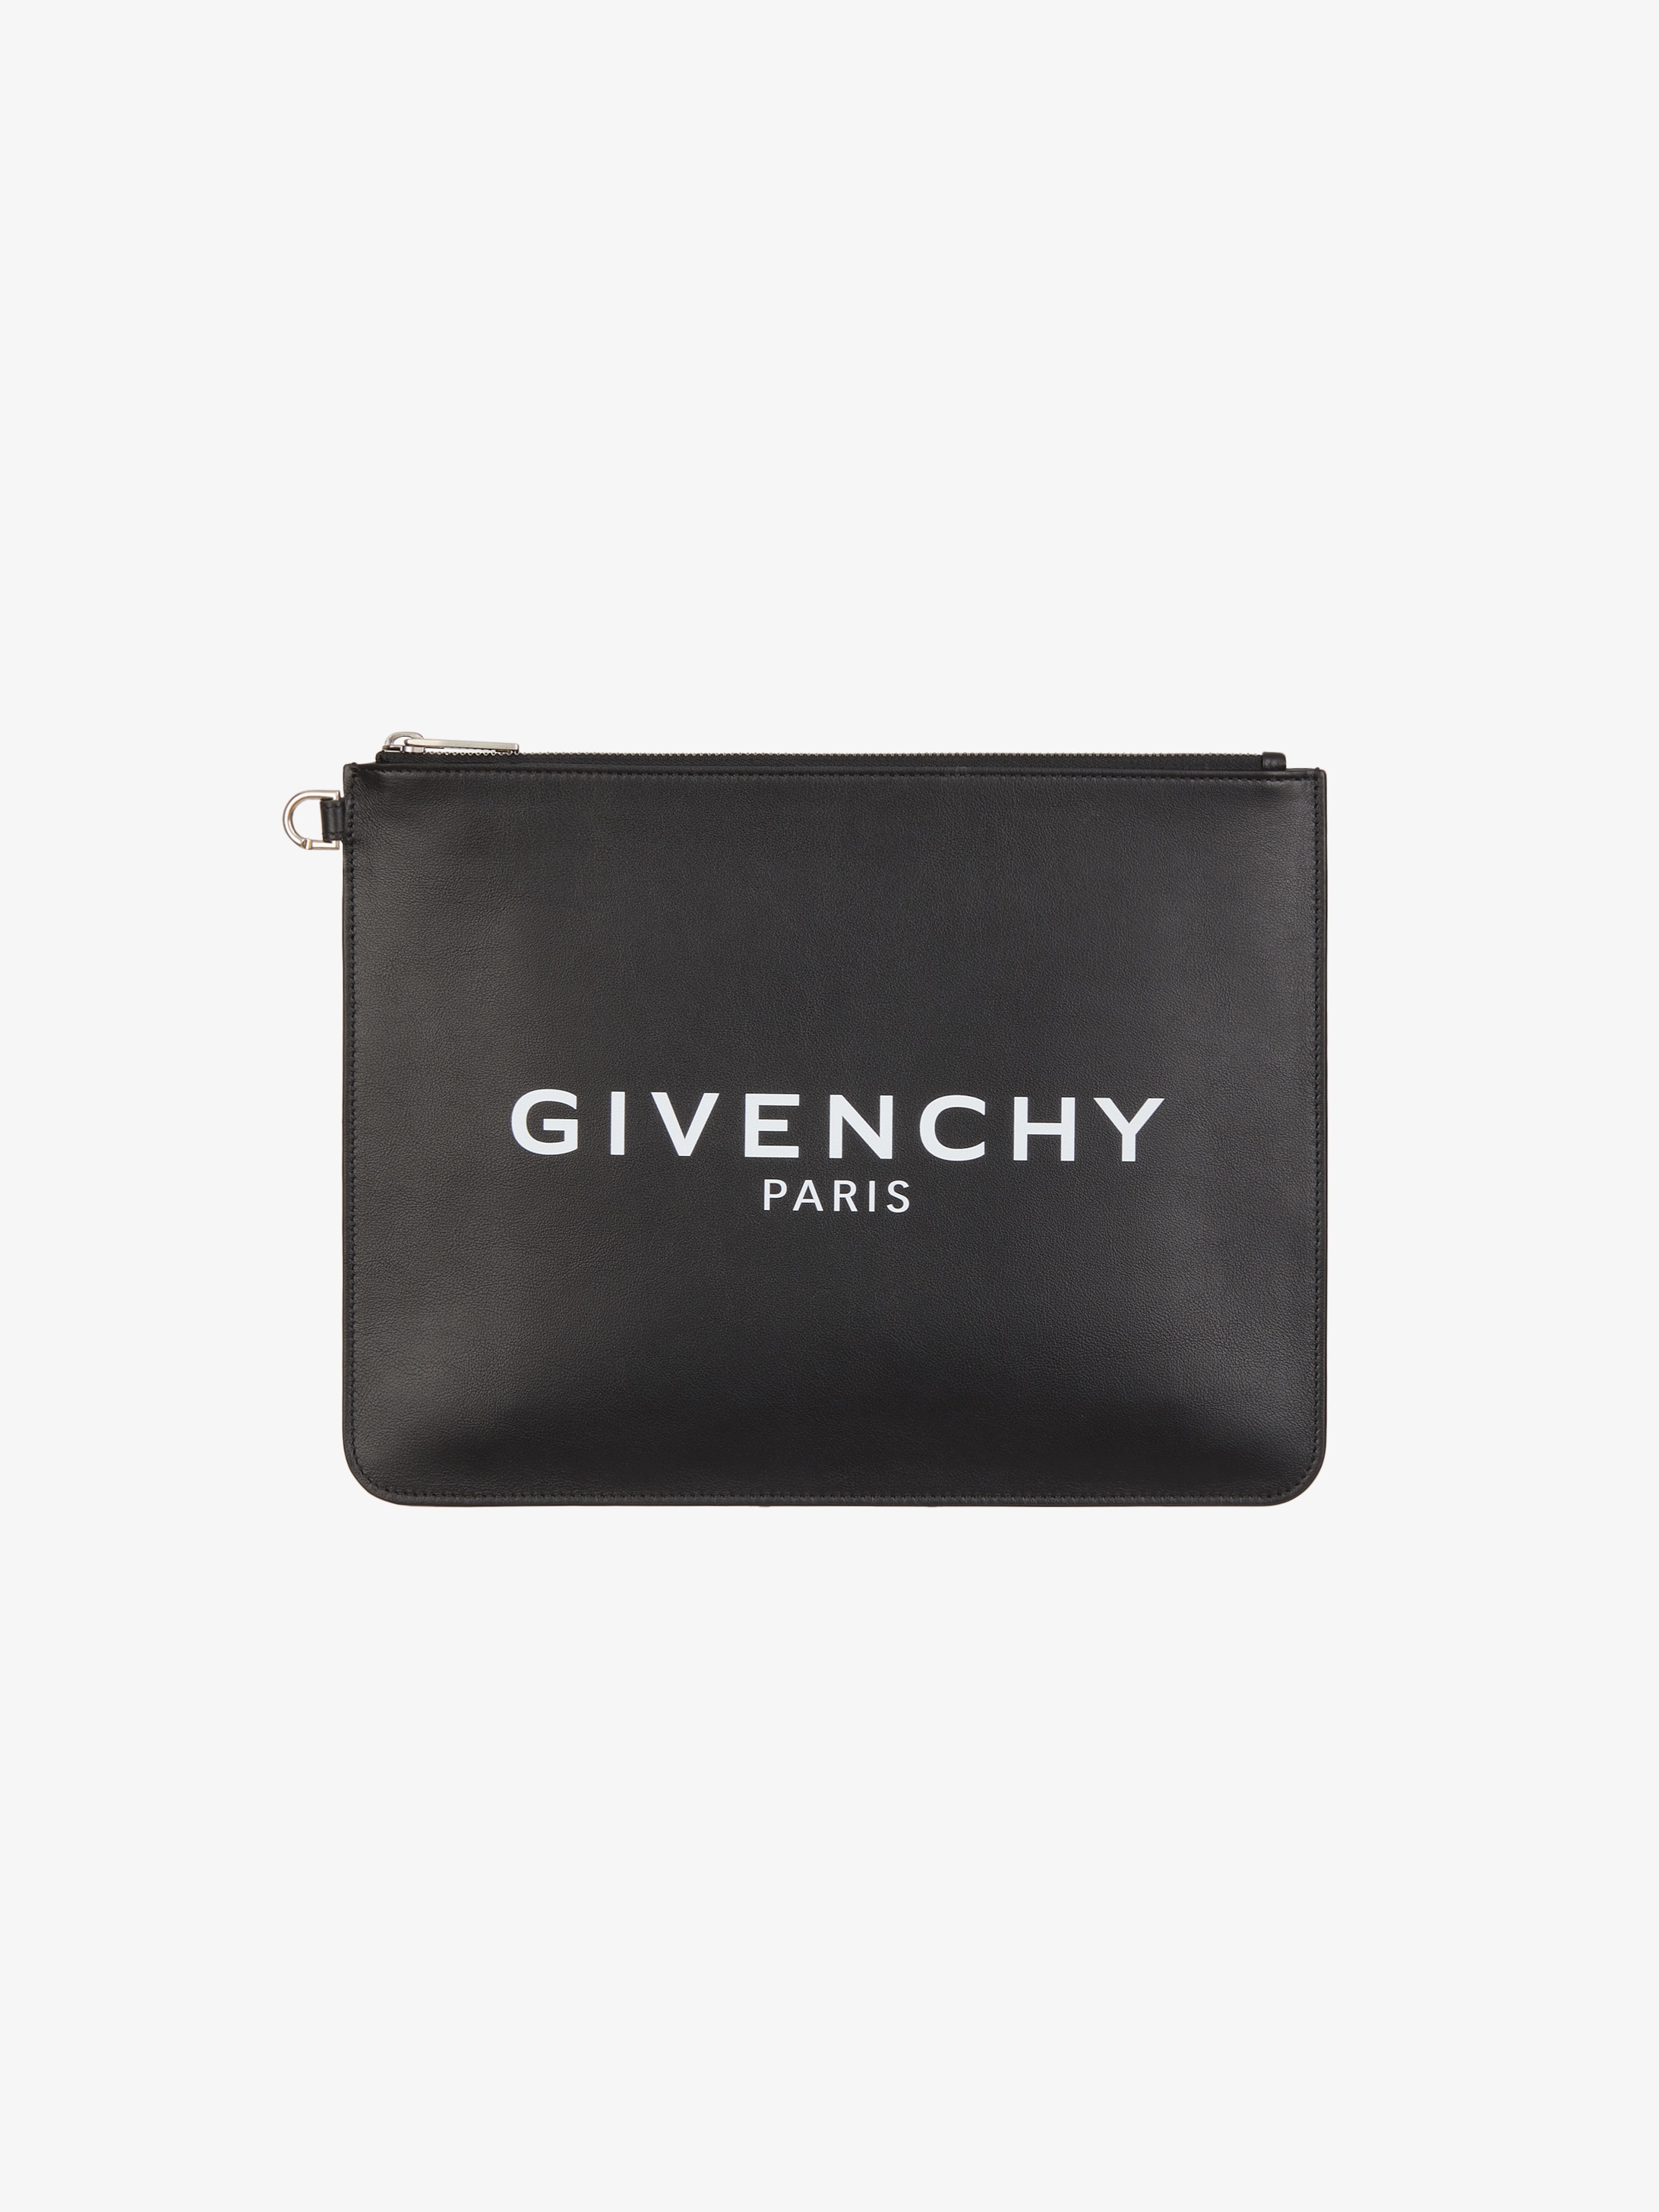 GIVENCHY PARIS large zipped pouch in 